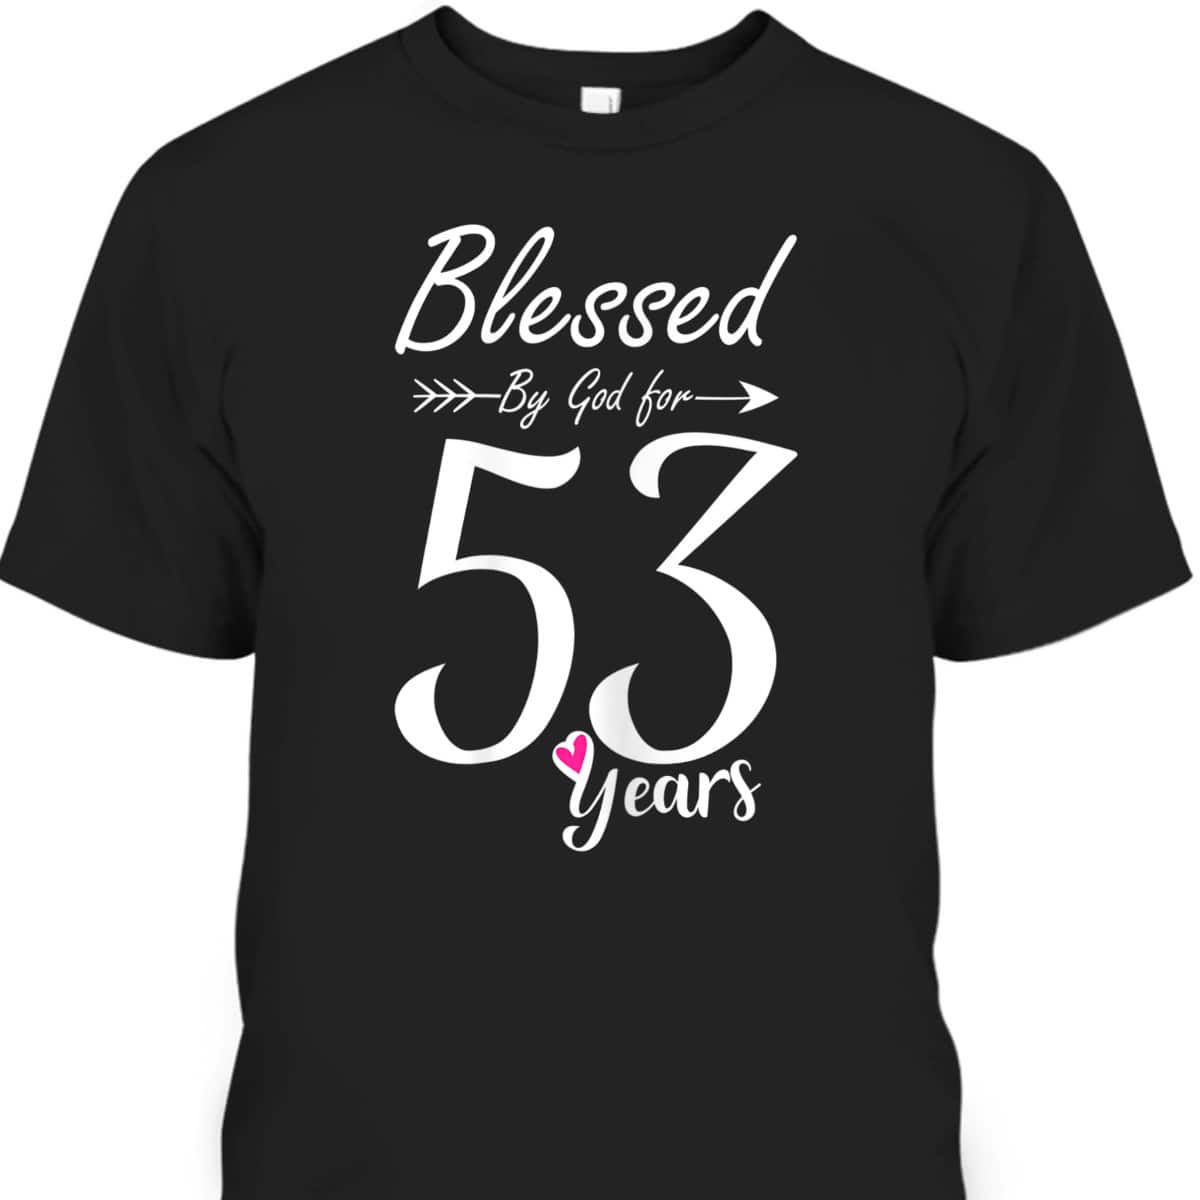 Christian 53rd Birthday Gift And Blessed For 53 Years T-Shirt